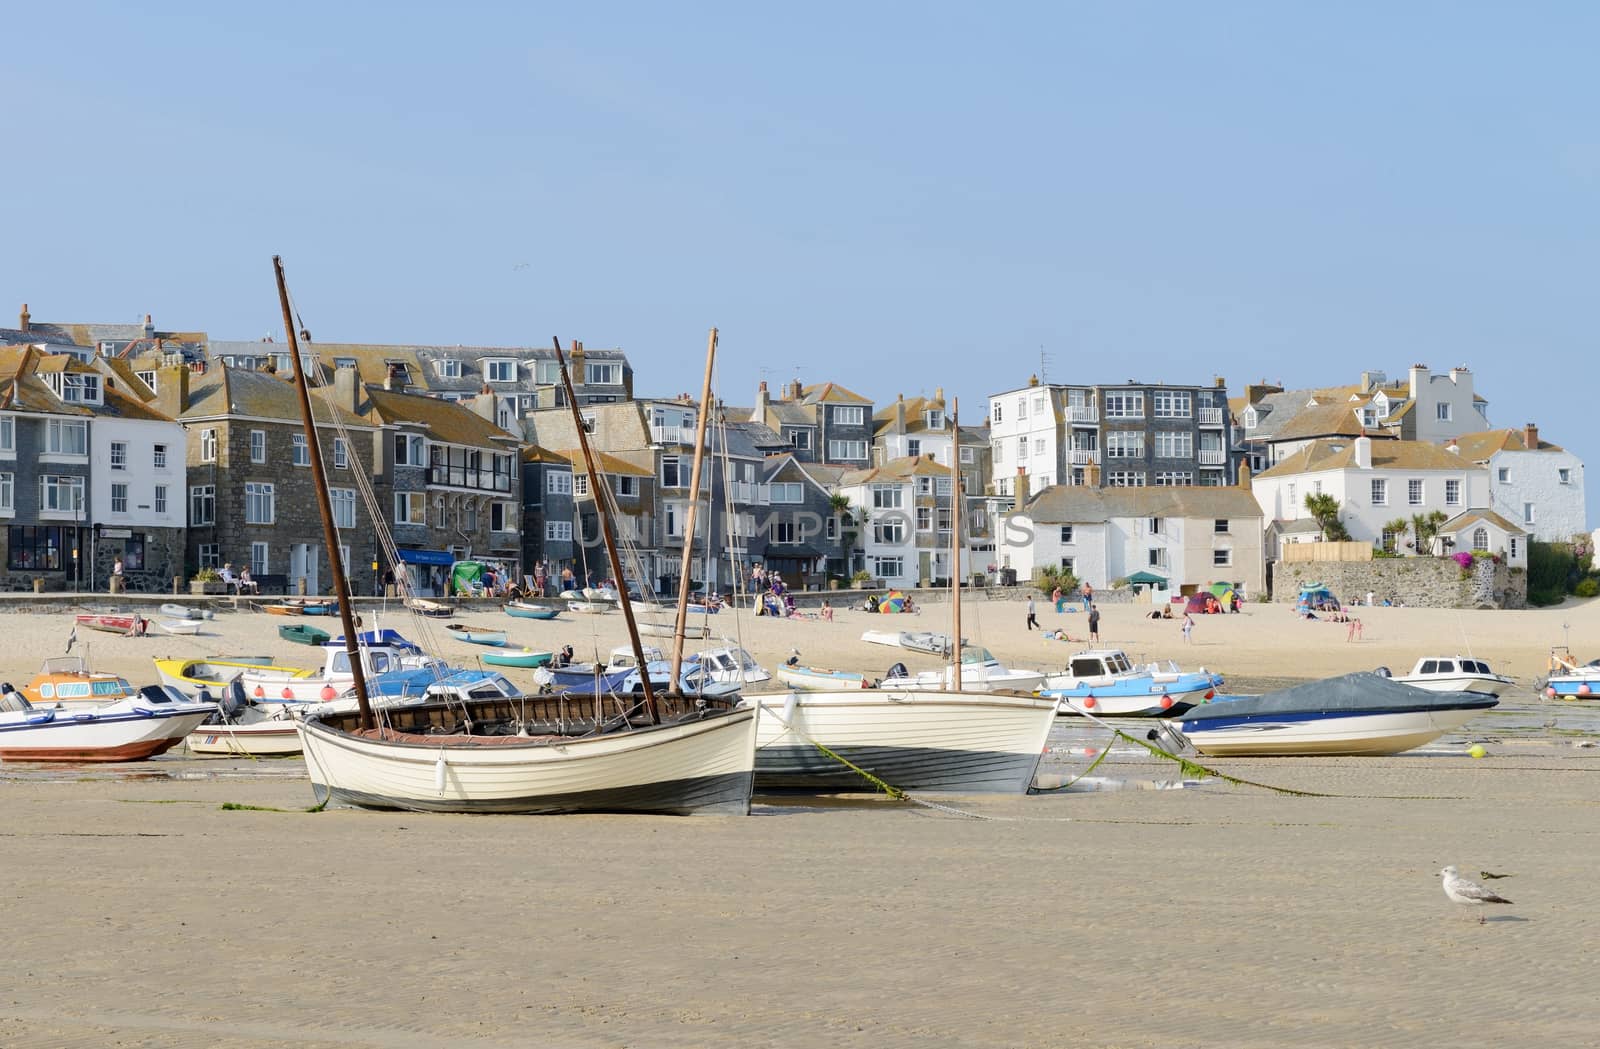 St Ives in Cornwall has boats on the beach on a sunny day in the summer